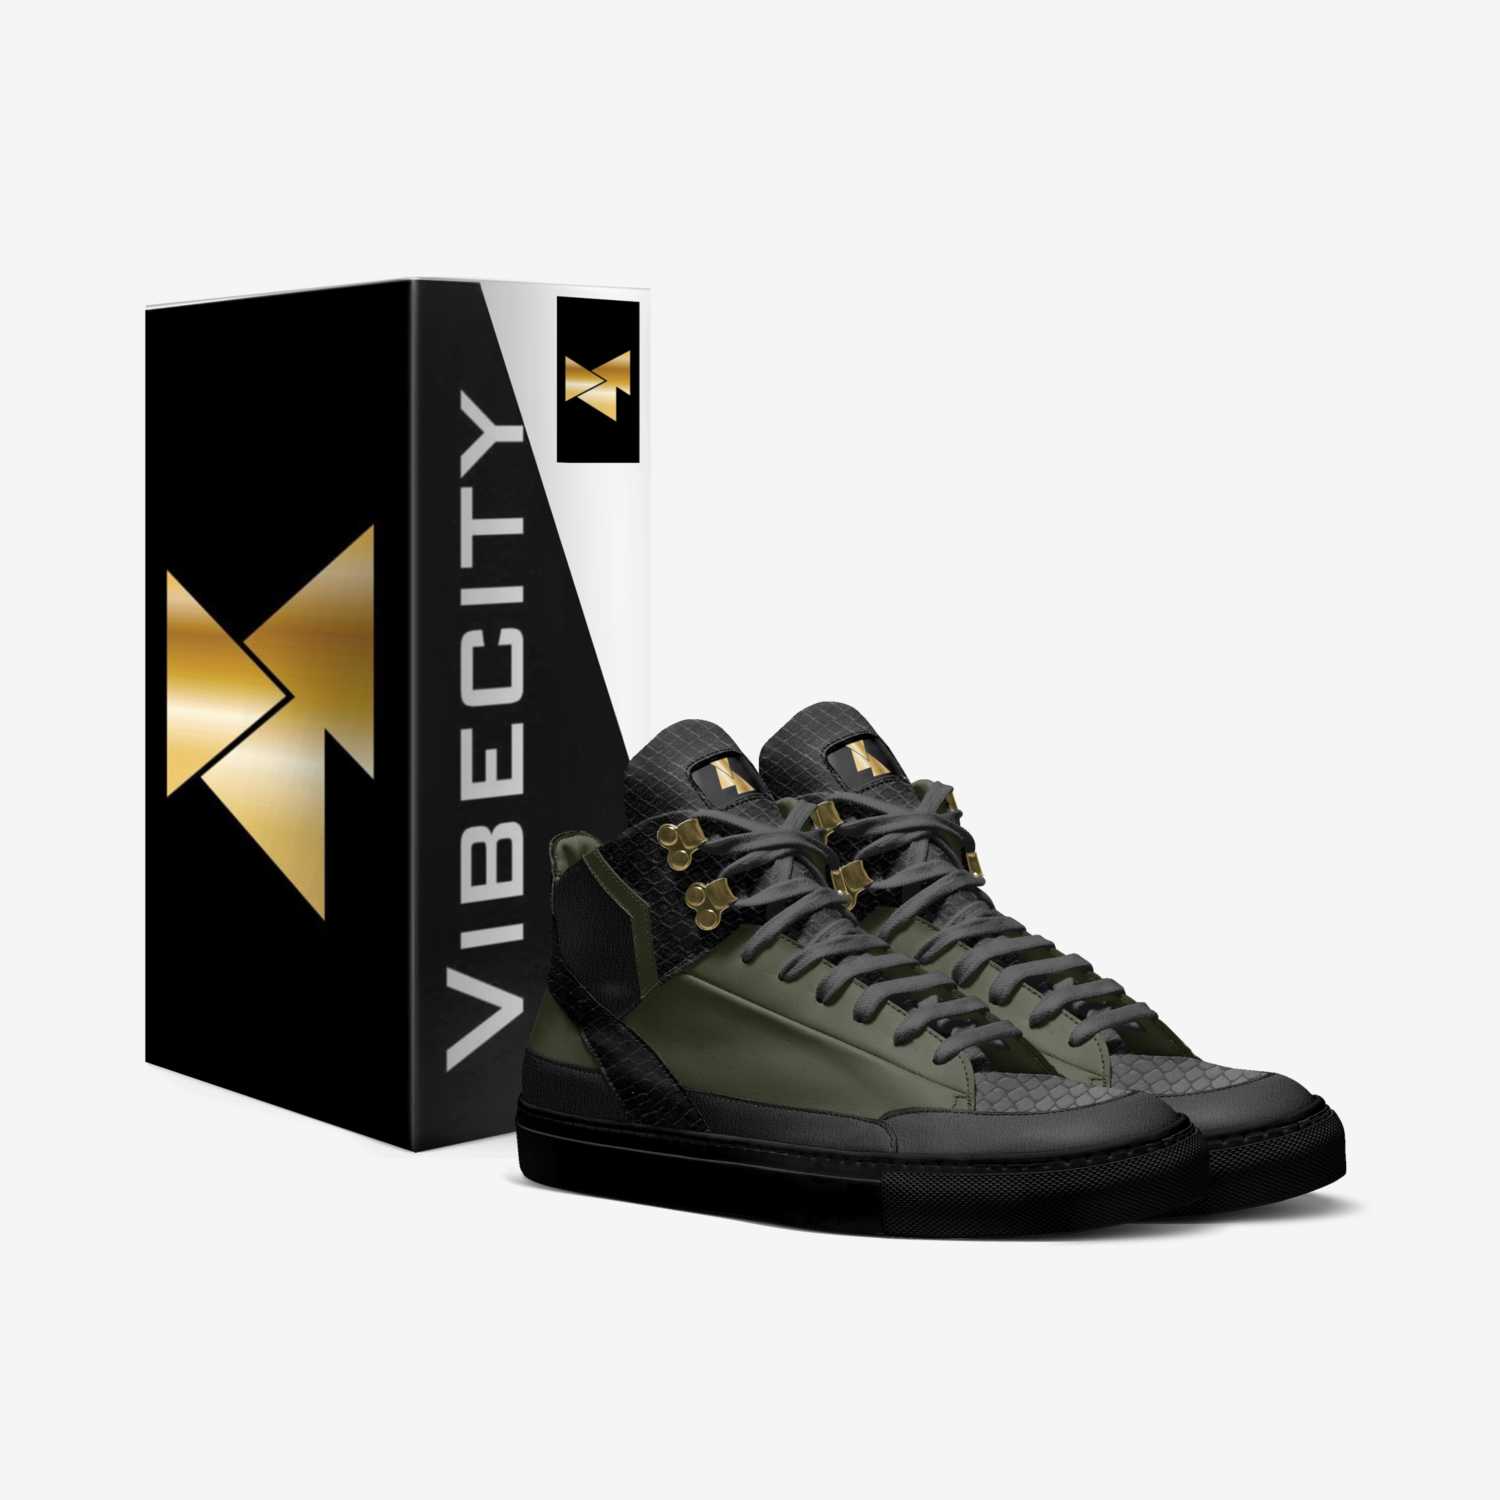 VIBECITY custom made in Italy shoes by Michael Leftwich | Box view